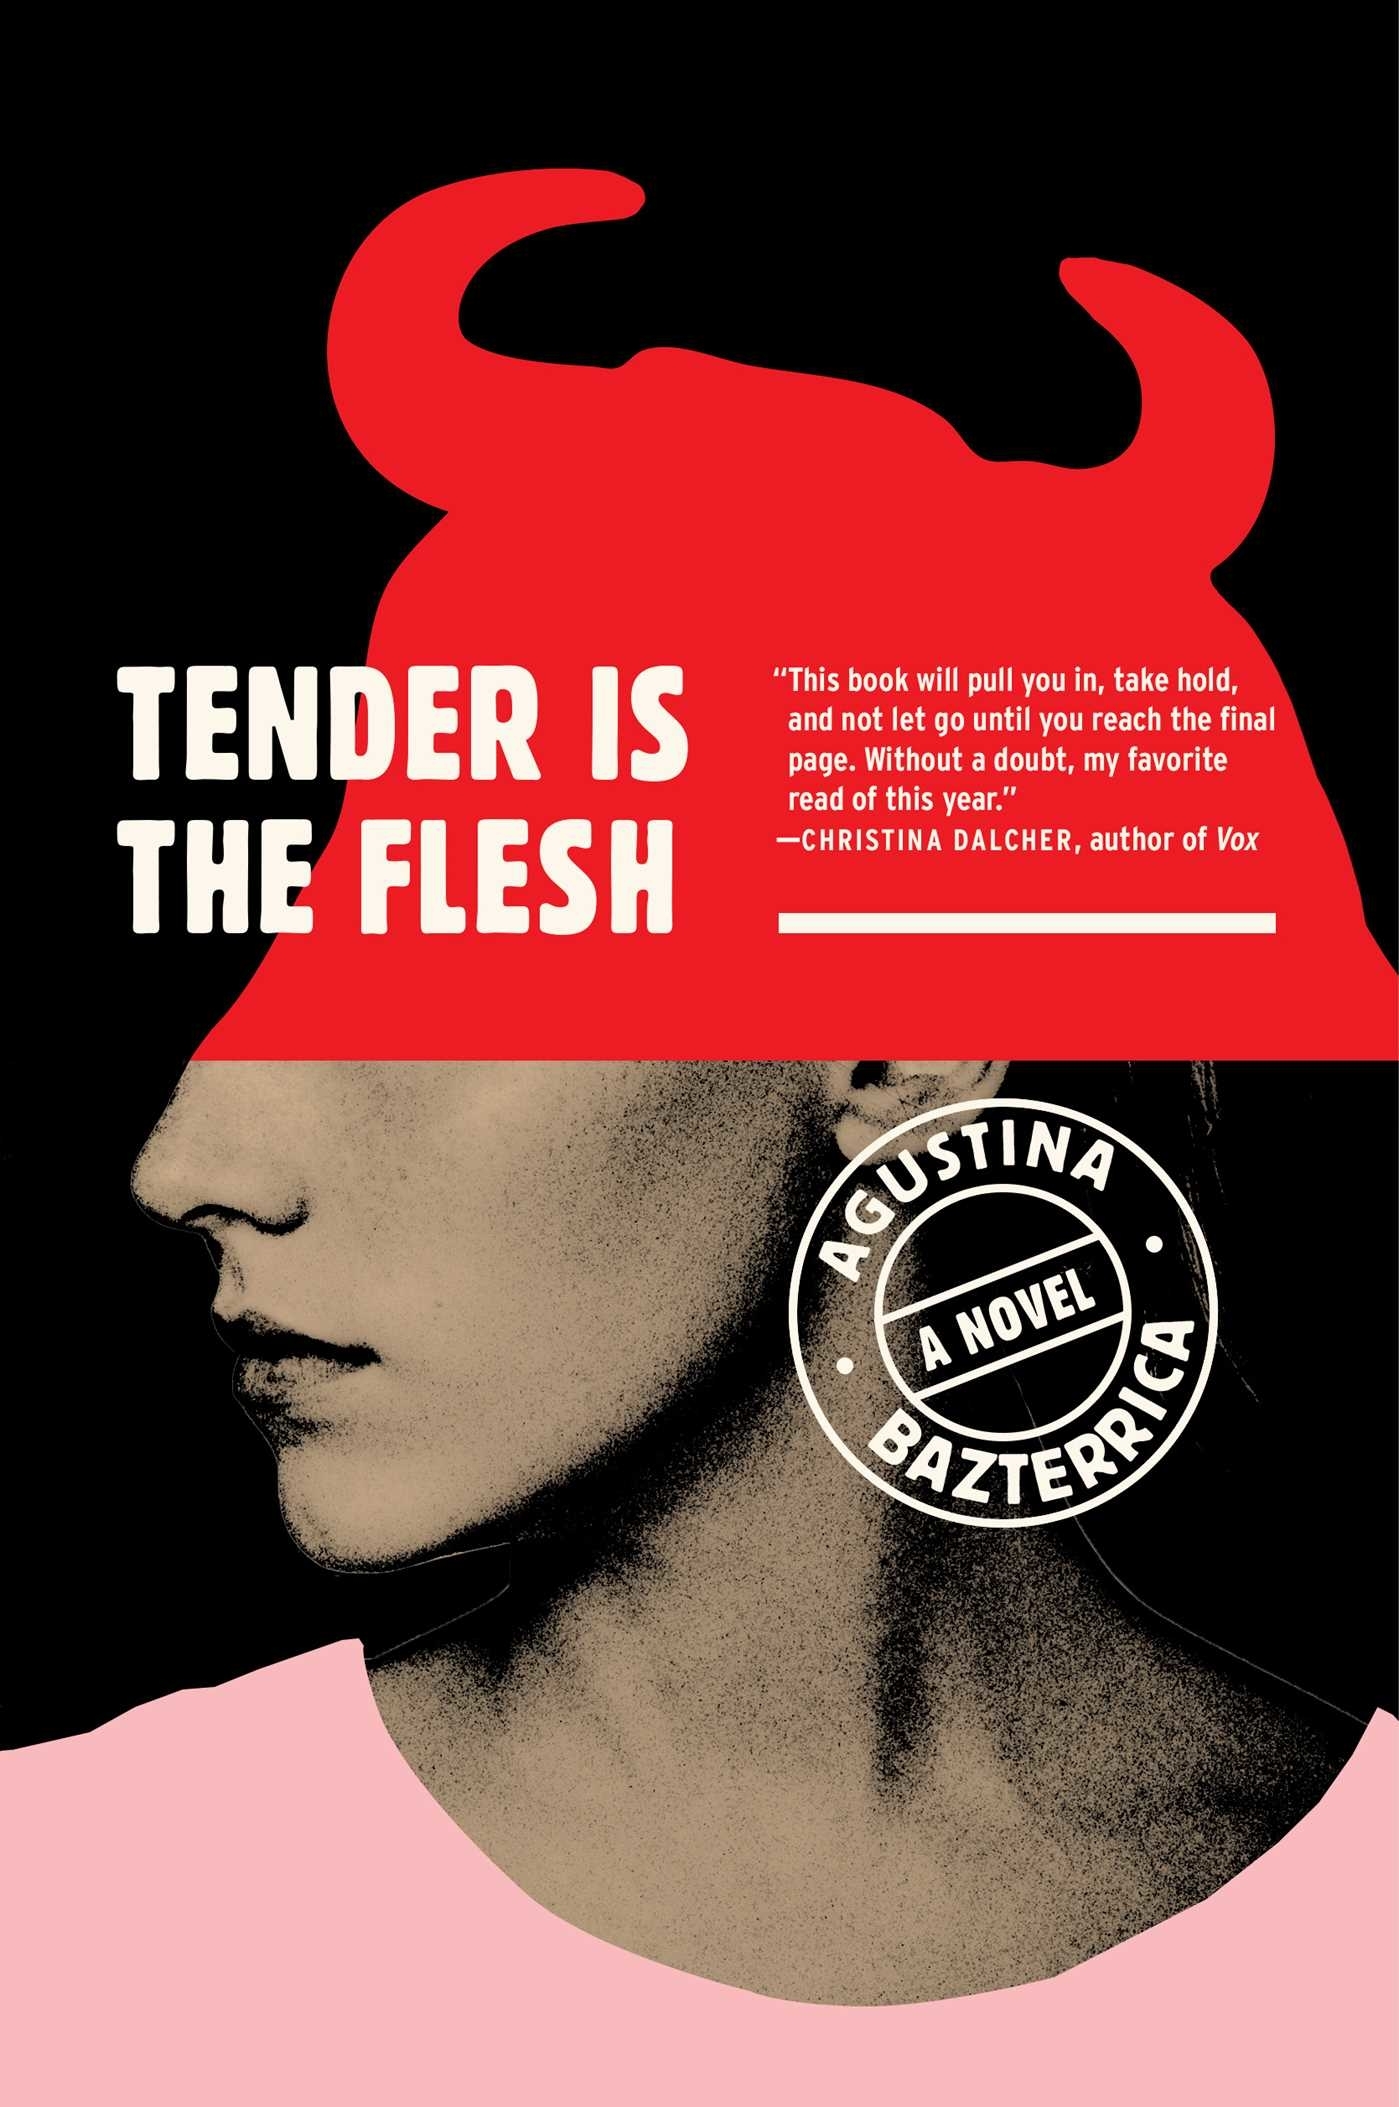 Book cover of &quot;Tender is the Flesh&quot; by Agustina Bazterrica with a partial profile of a person and novel&#x27;s title in stylized text